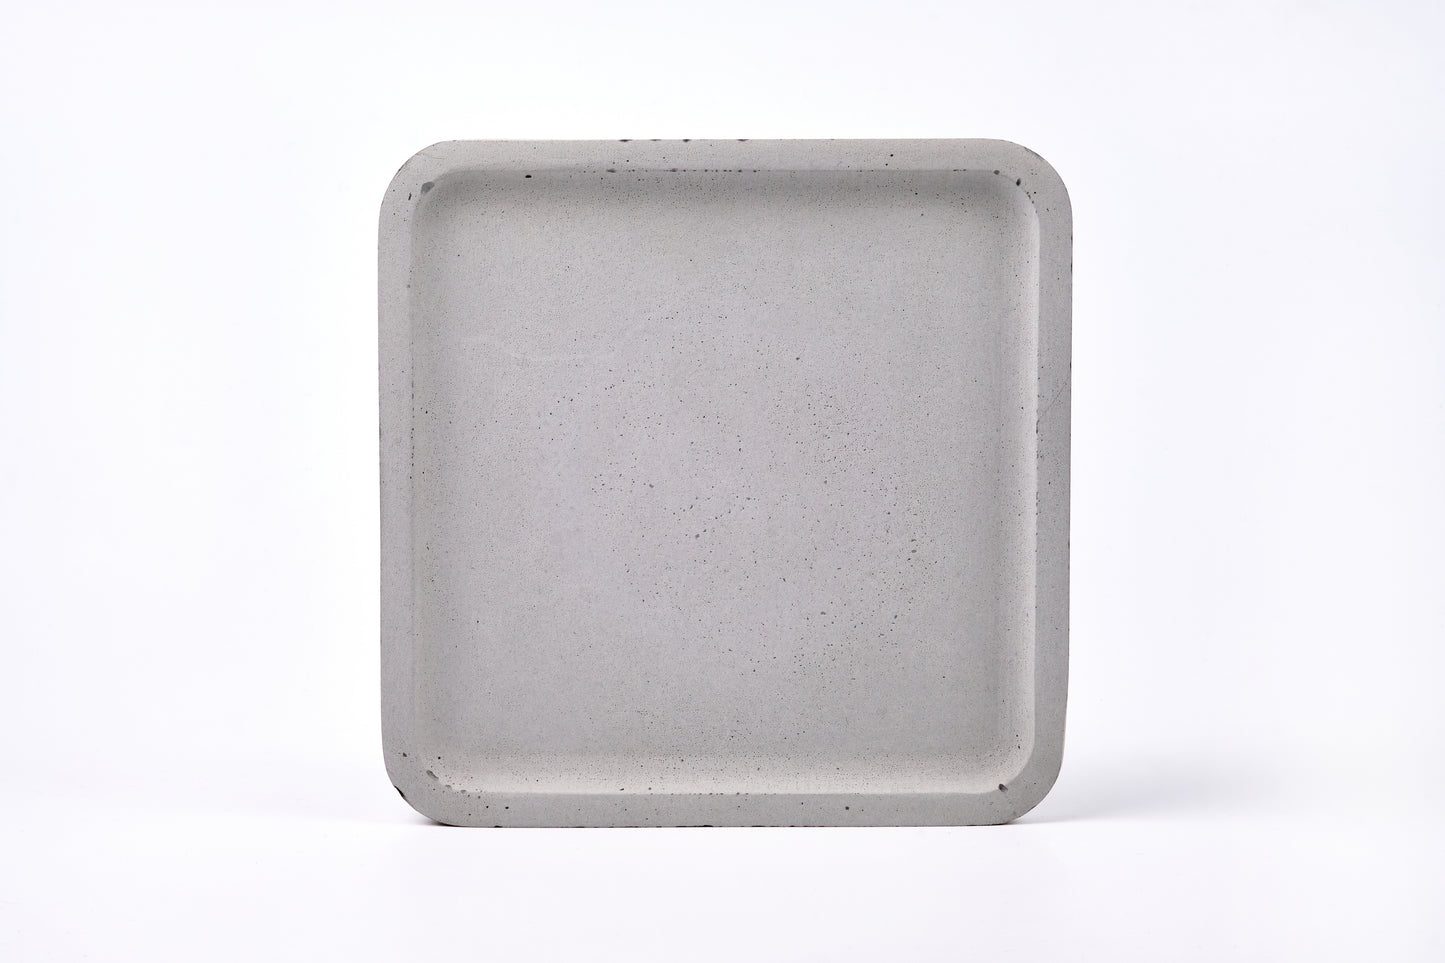 Concrete square tray / accessory holder (large) - "grey"